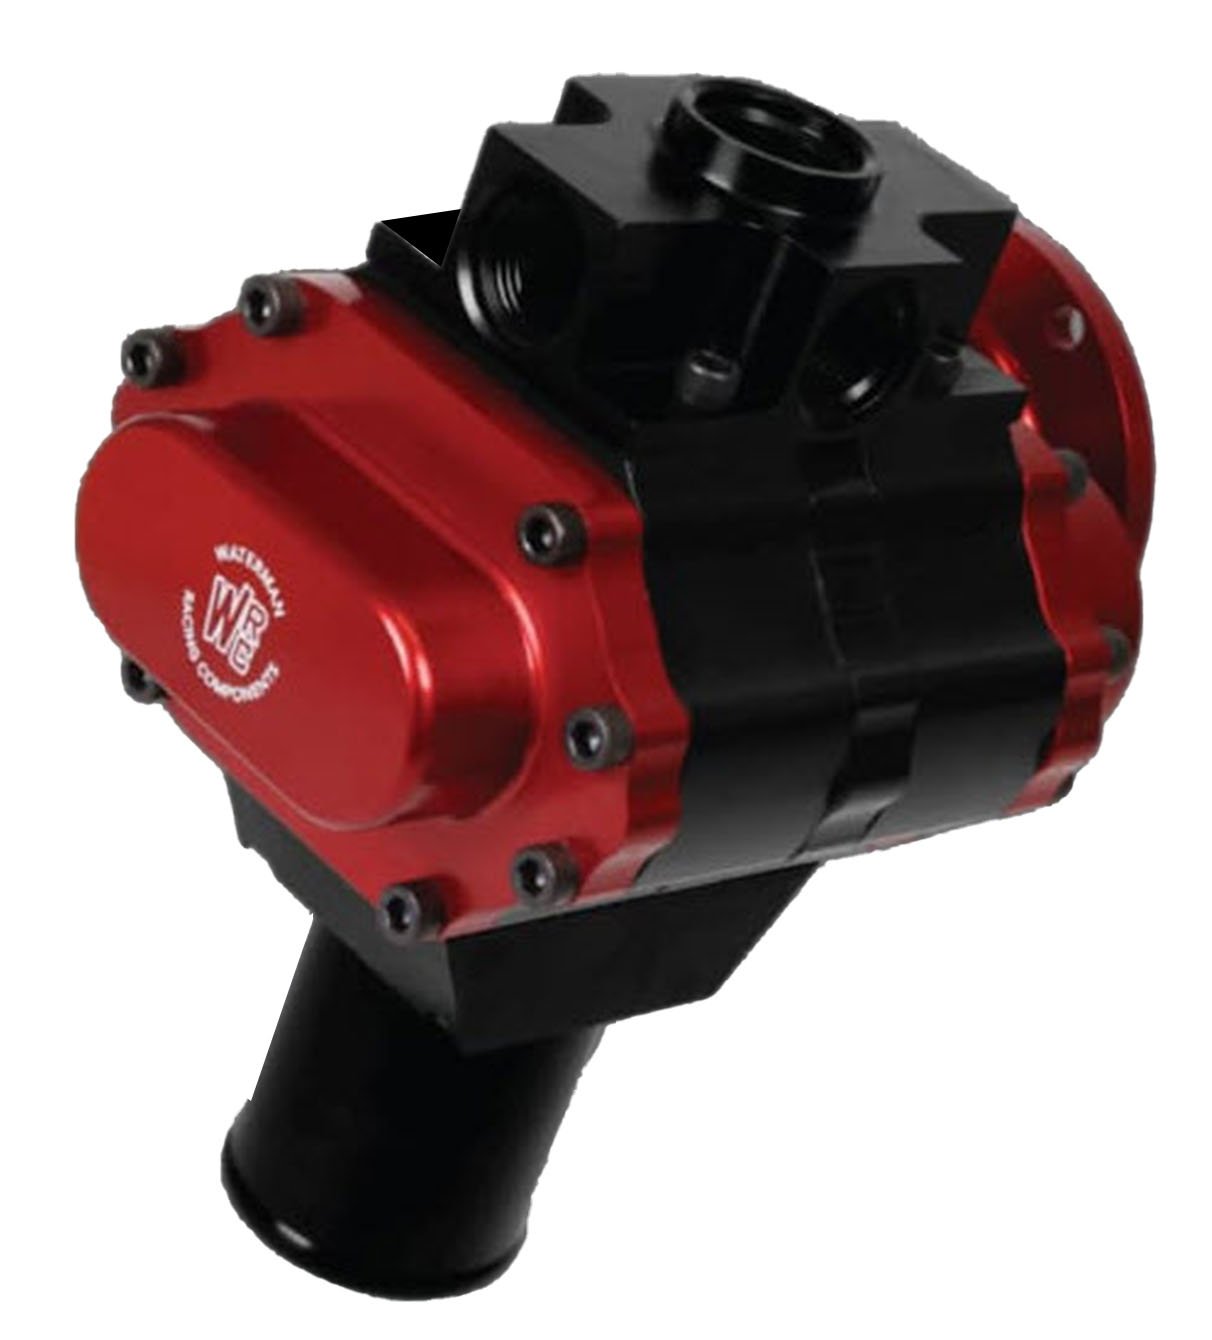 1/2 Super Bertha Fuel Pump w/Standard Rotation, V-Band Mount, 3/8 in. Hex Drive, Aluminum Center, and 1.00 in. Gear